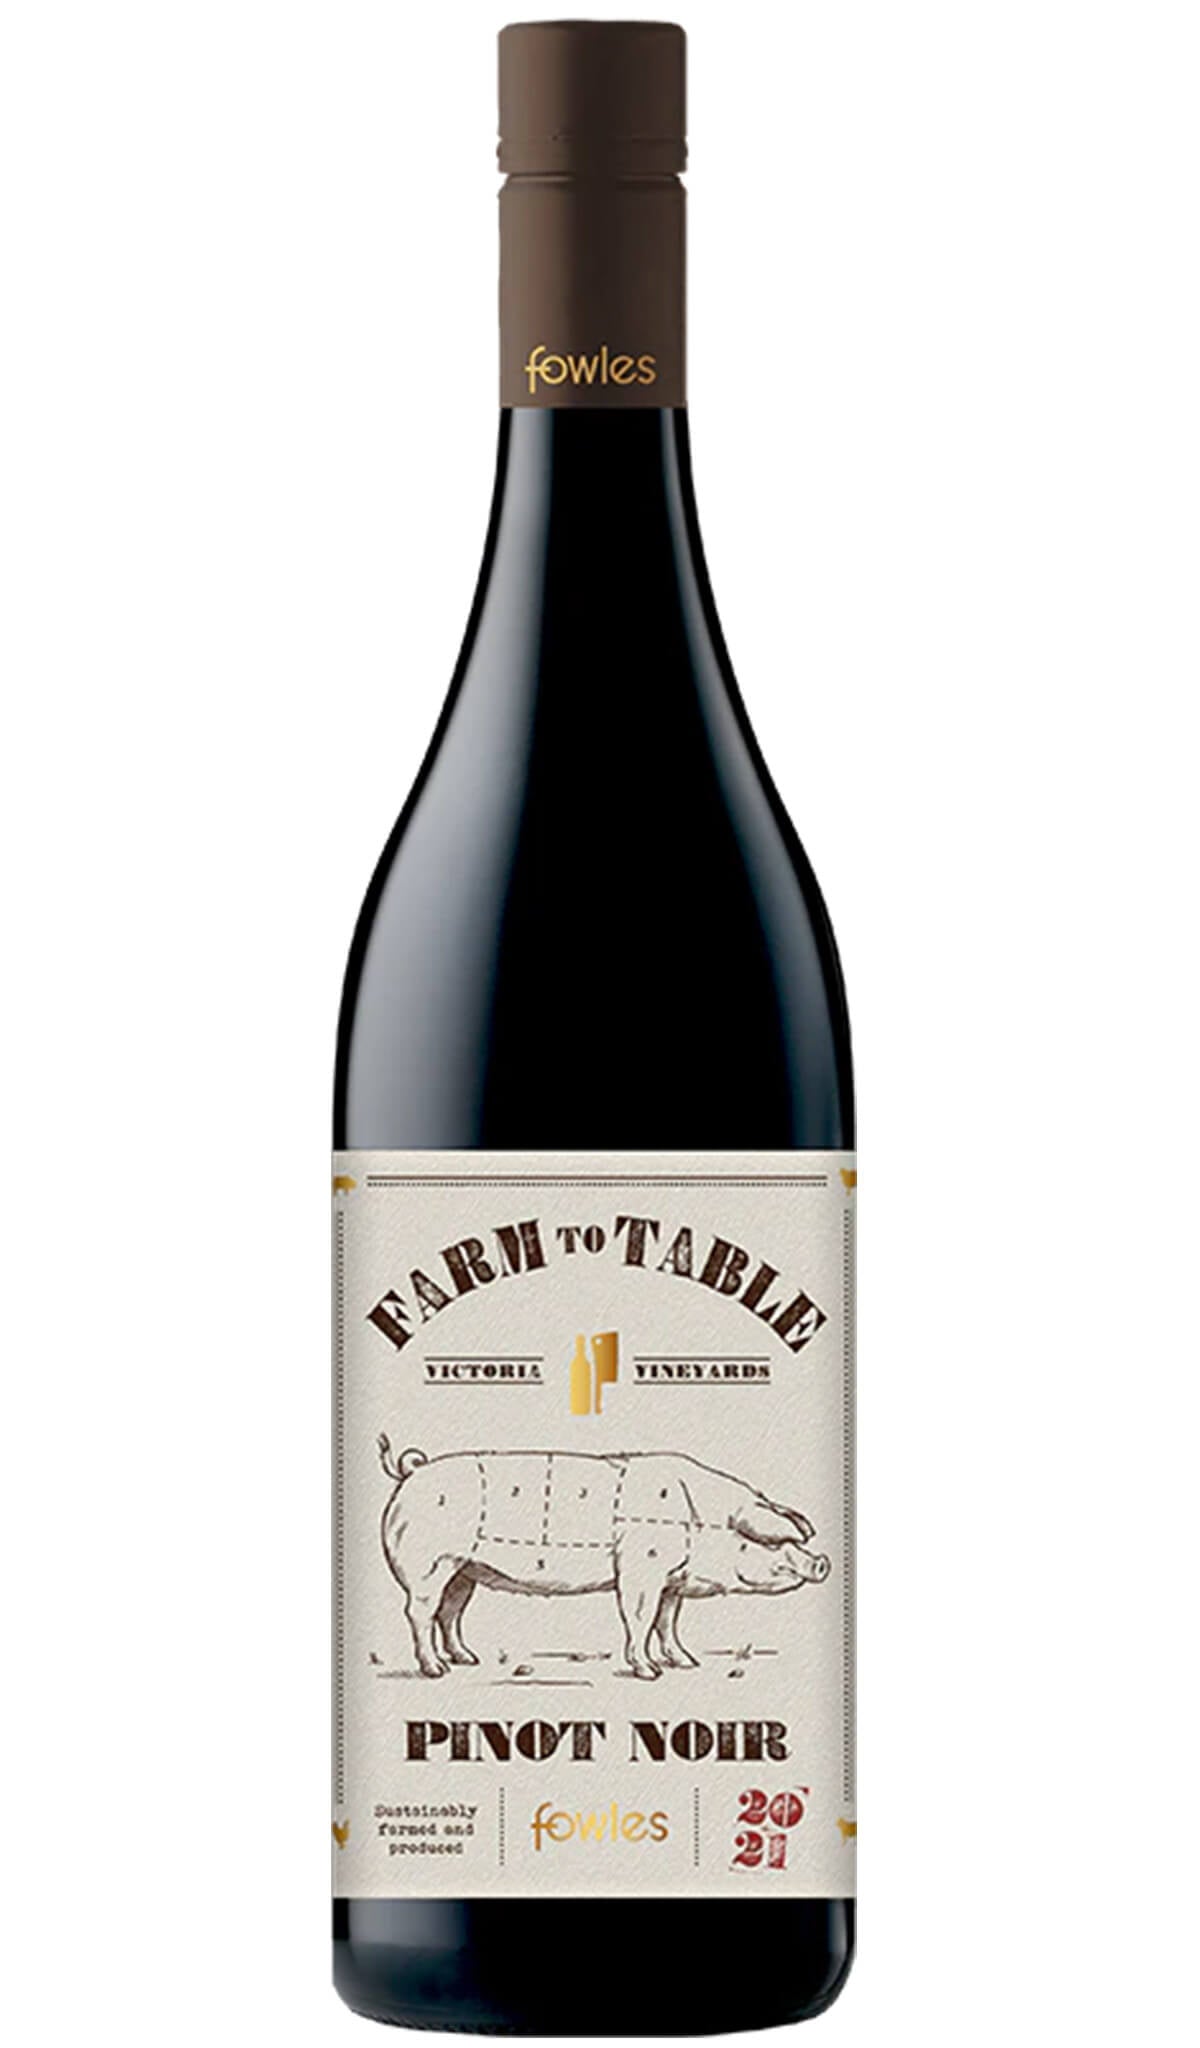 Find out more, explore the range and buy Fowles Farm To Table Pinot Noir 2021 available online at Wine Sellers Direct - Australia's independent liquor specialists.